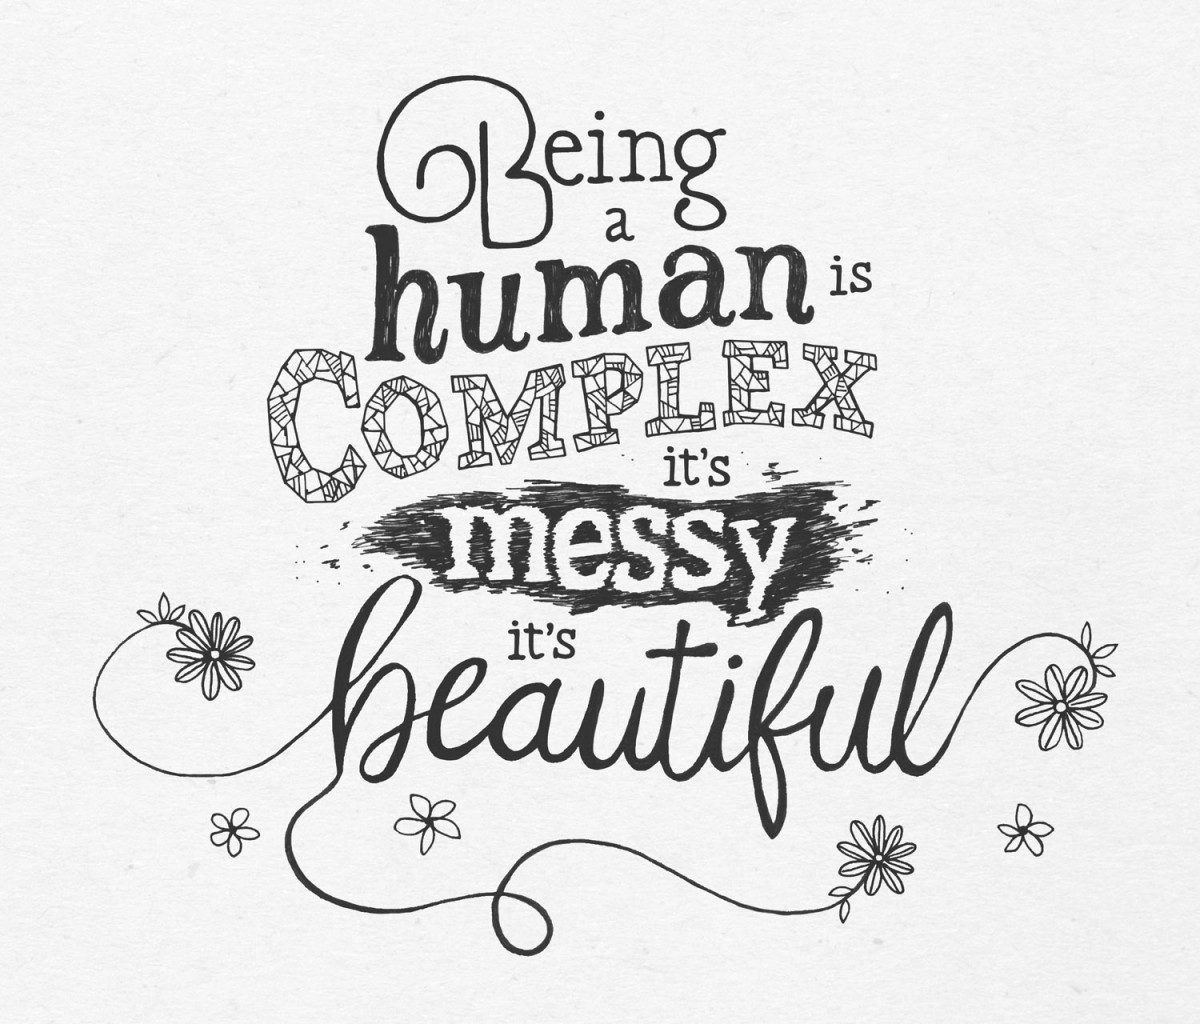 Being a human is complex it's messy it's beautiful - Angela Taylor // illustration by Carolyn Sukava [BFA(Hons)/04]